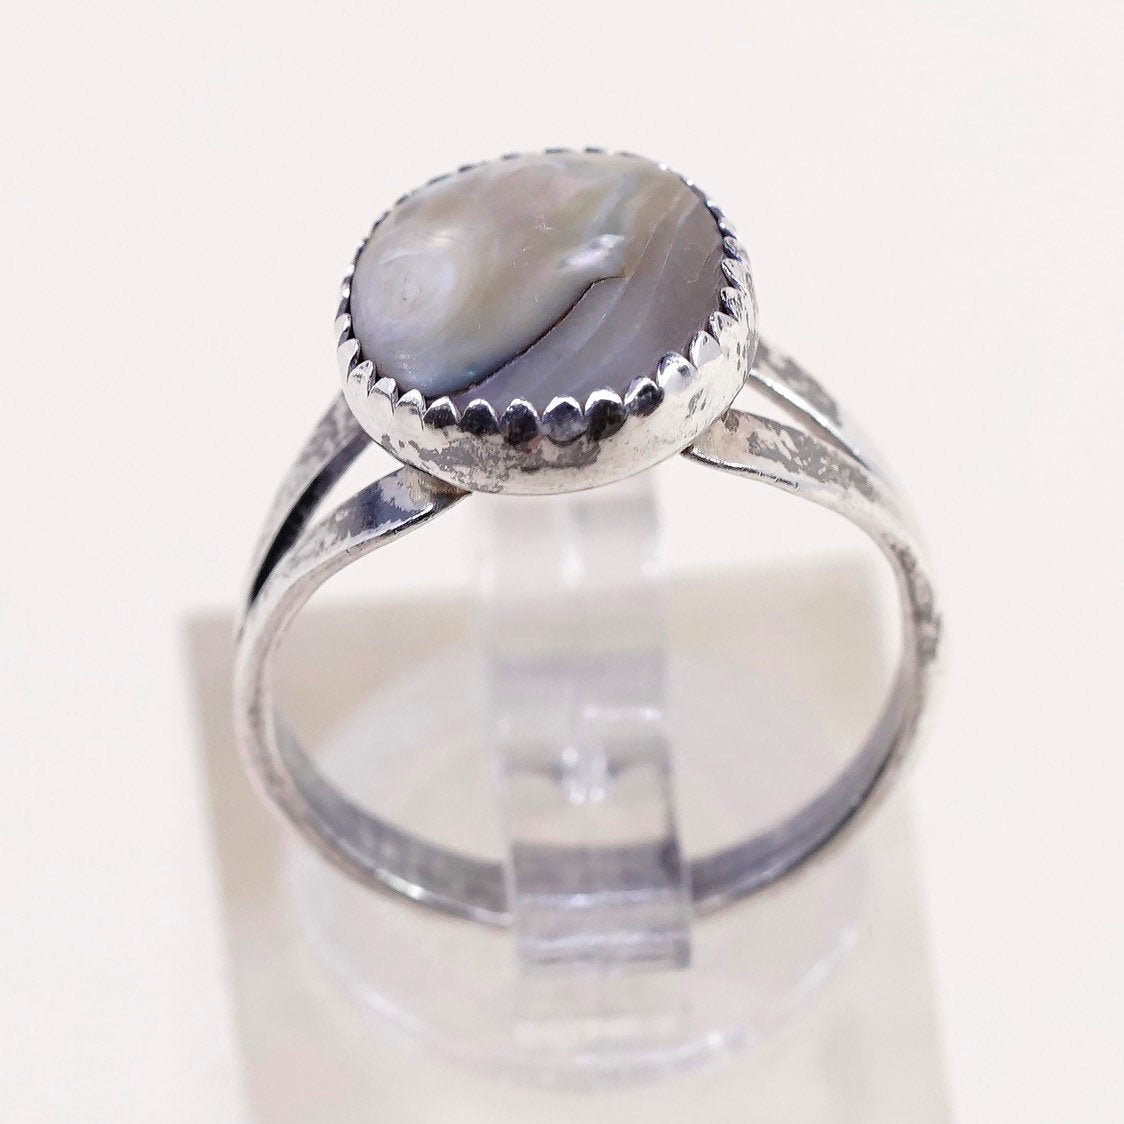 sz 6, vtg sterling silver handmade ring, 925 w/ oval abalone, silver tested